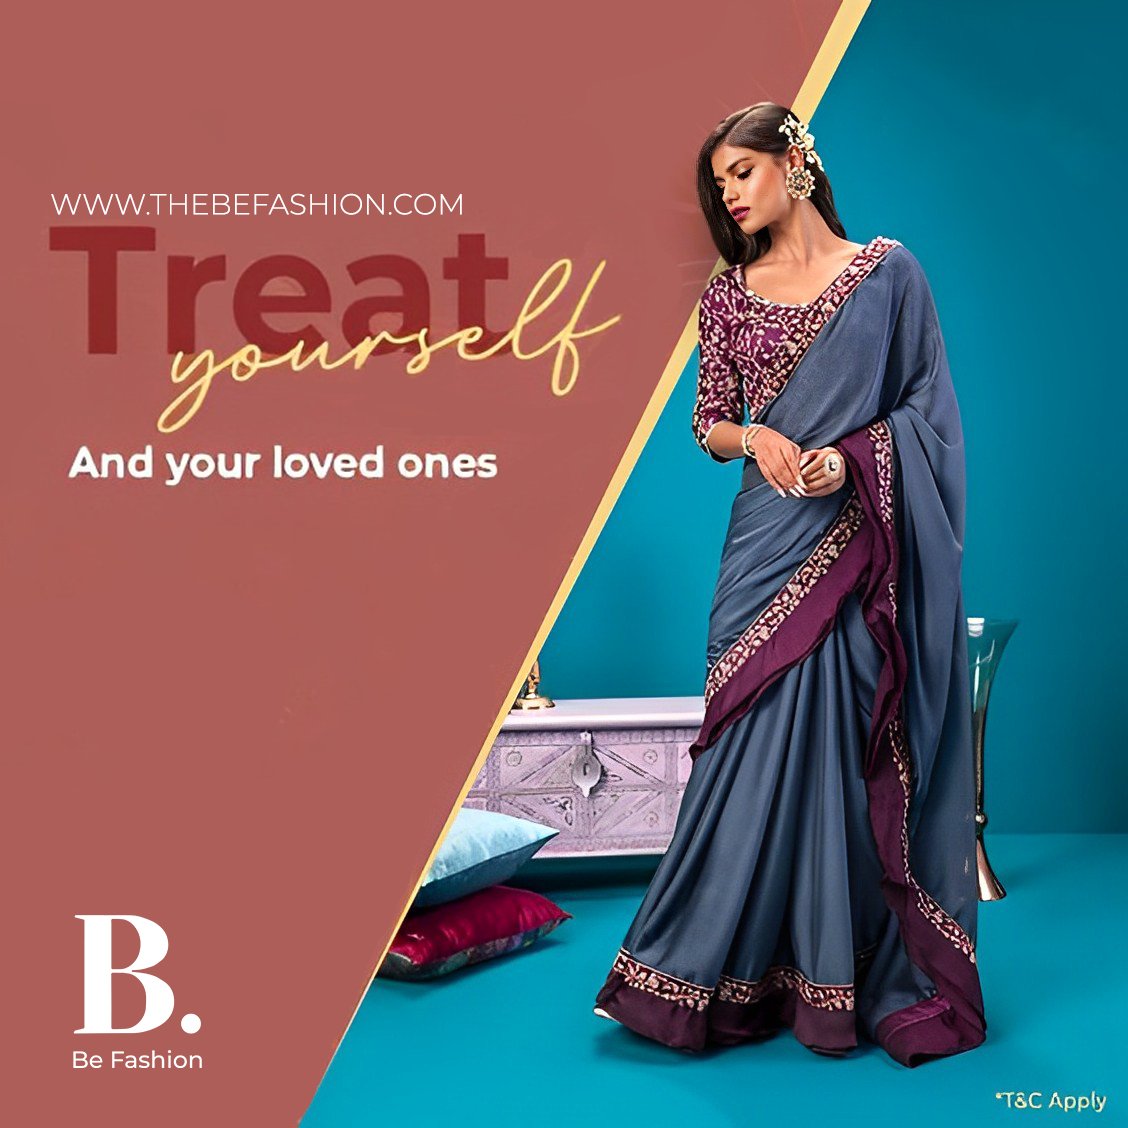 Radiate Elegance, Embrace Tradition: Dive into the world of Women's Indian Ethnic Wear with Be Fashion. Timeless Styles for Every Occasion. 🌟👗✨

#befashion #womensfashion #womensfashionstyle #womensfashionblog #womensfashions #womensfashionreview #womensfashionaccessories